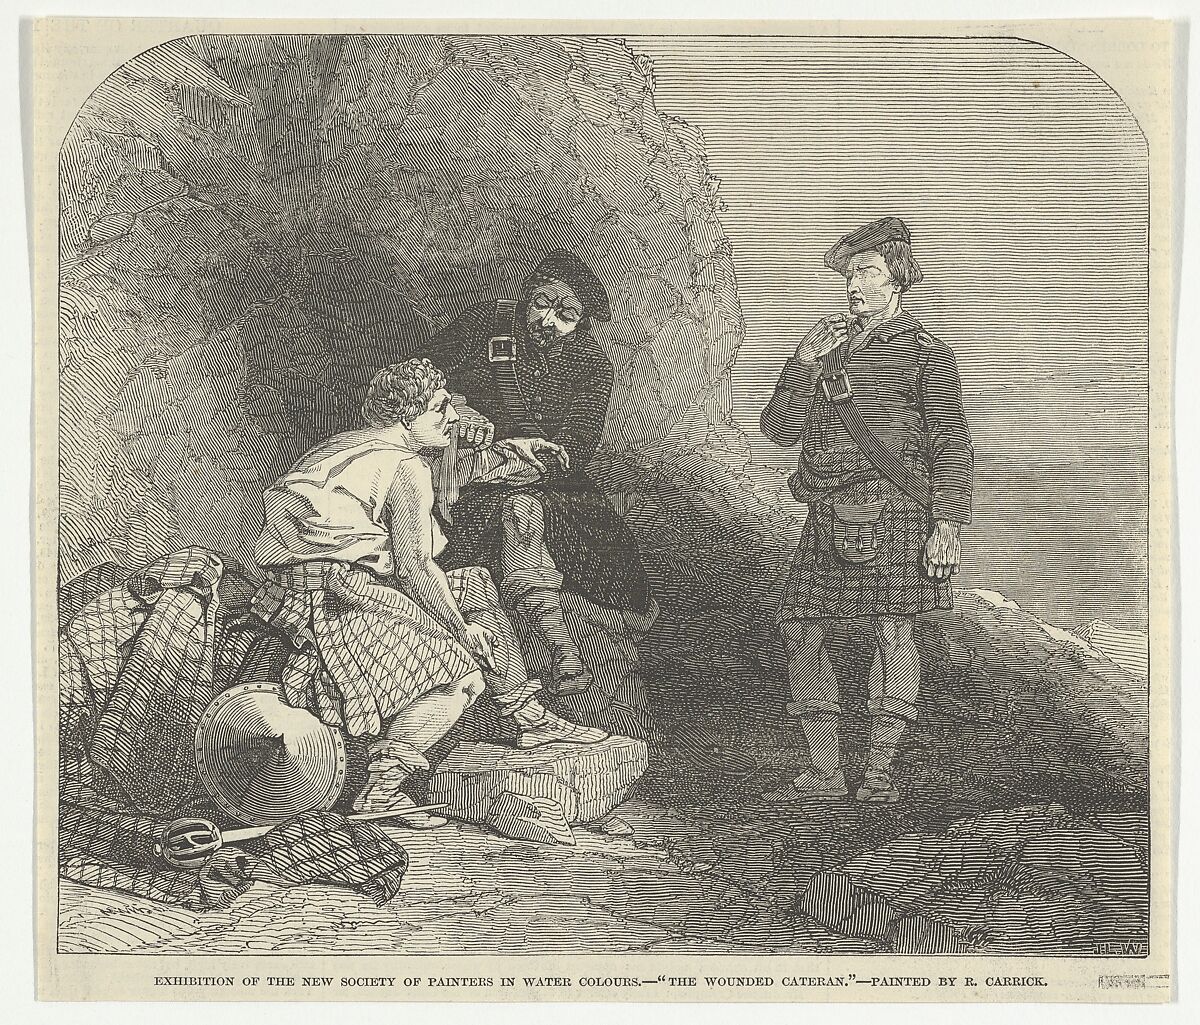 The Wounded Cateran by R. Carrick, Exhibition of the New Society of Painters in Water Colours, from "Illustrated London News", Joseph Lionel Williams (British, ca. 1815–1877 London), Wood engraving 